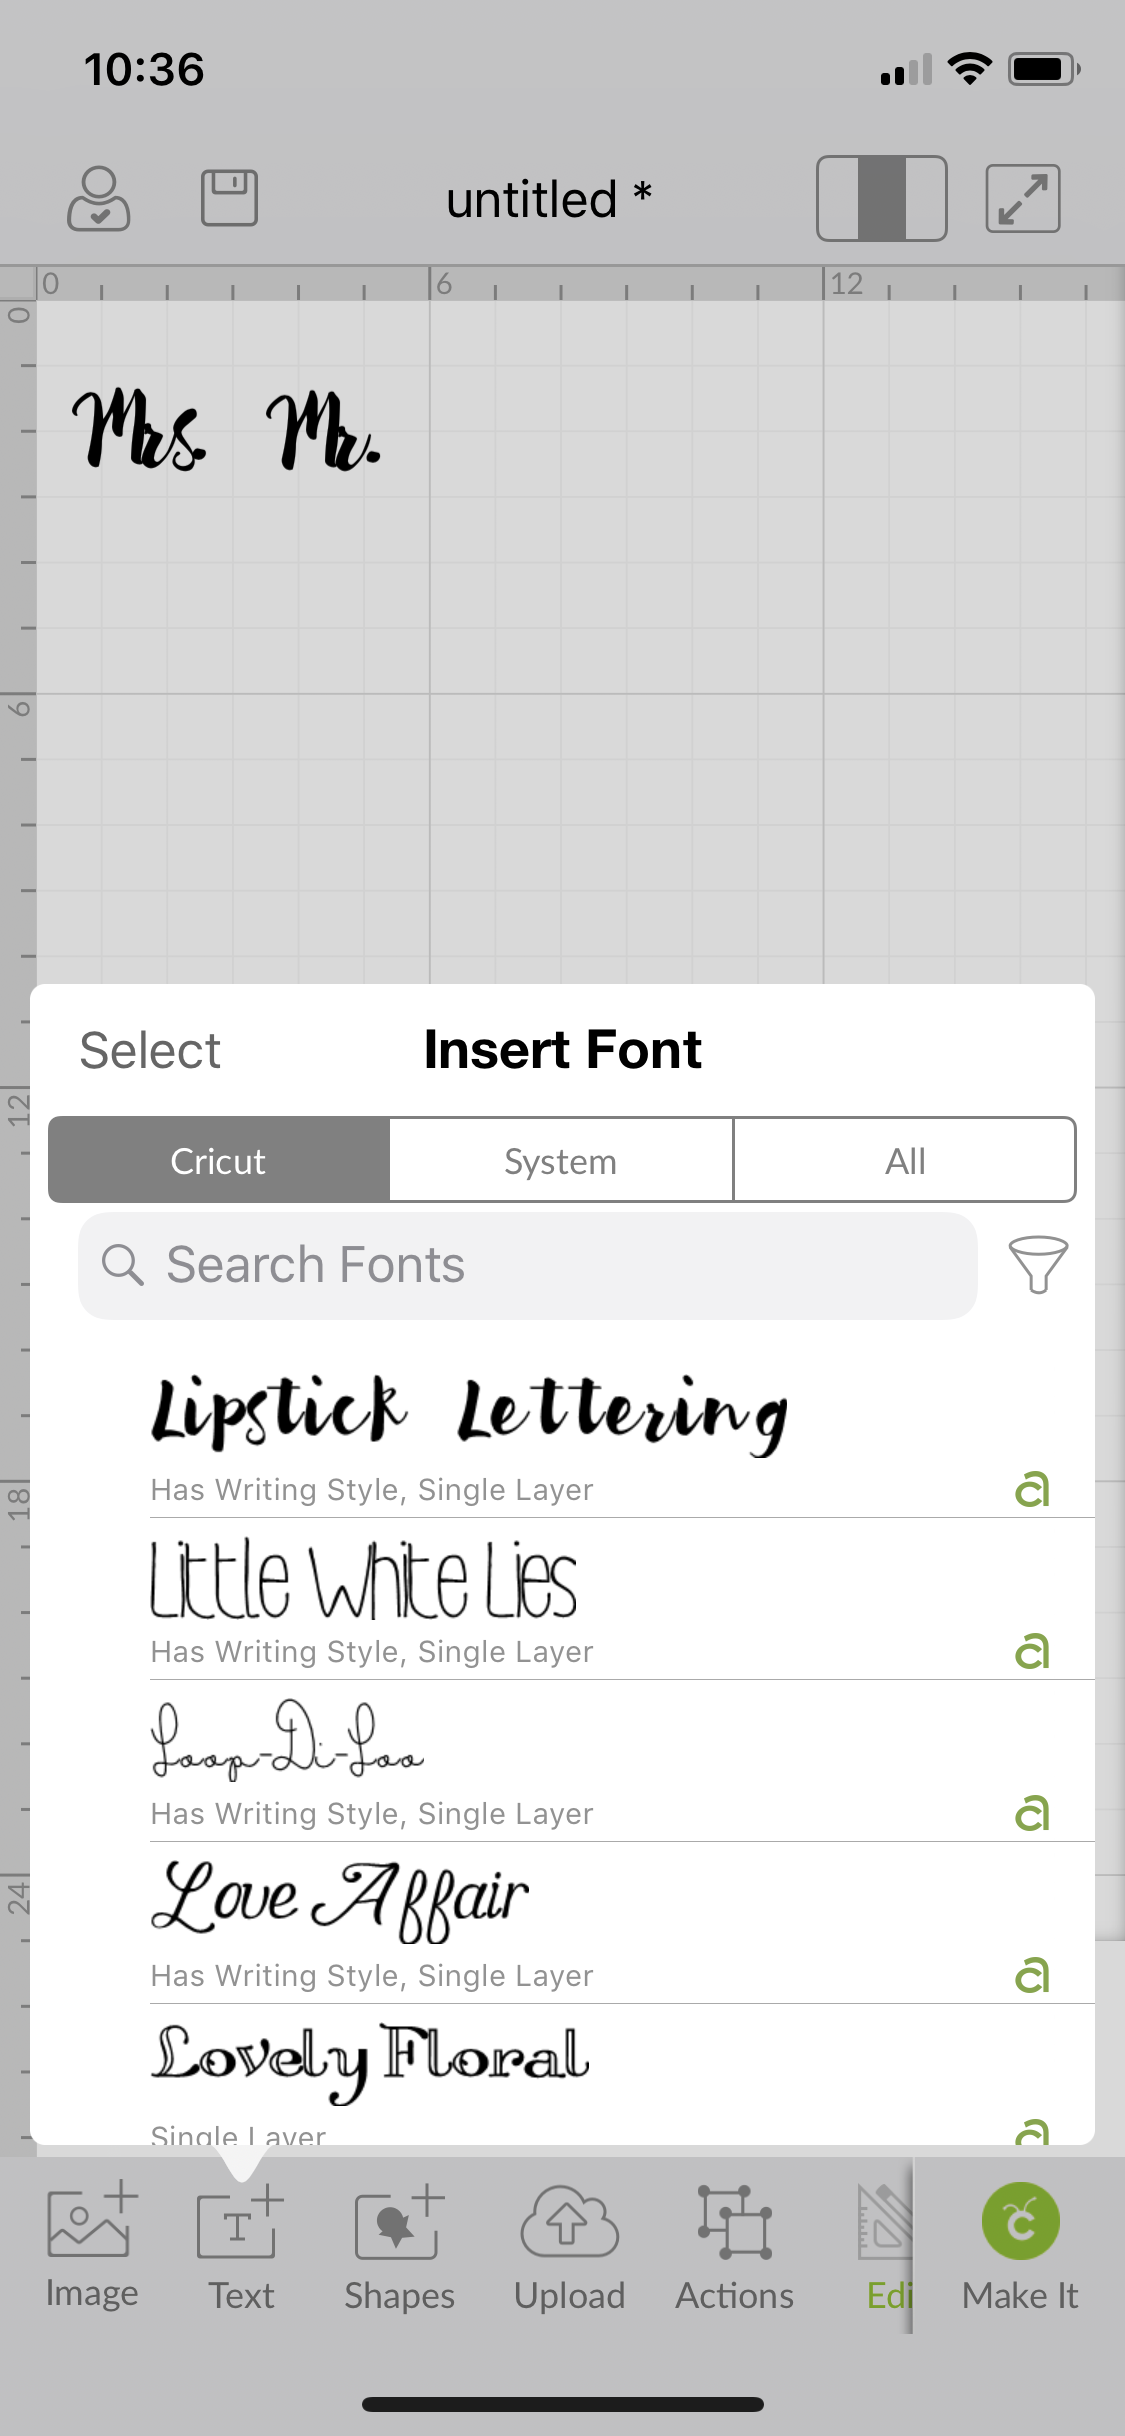 Cricut Design Space App for mobile crafting on the go!